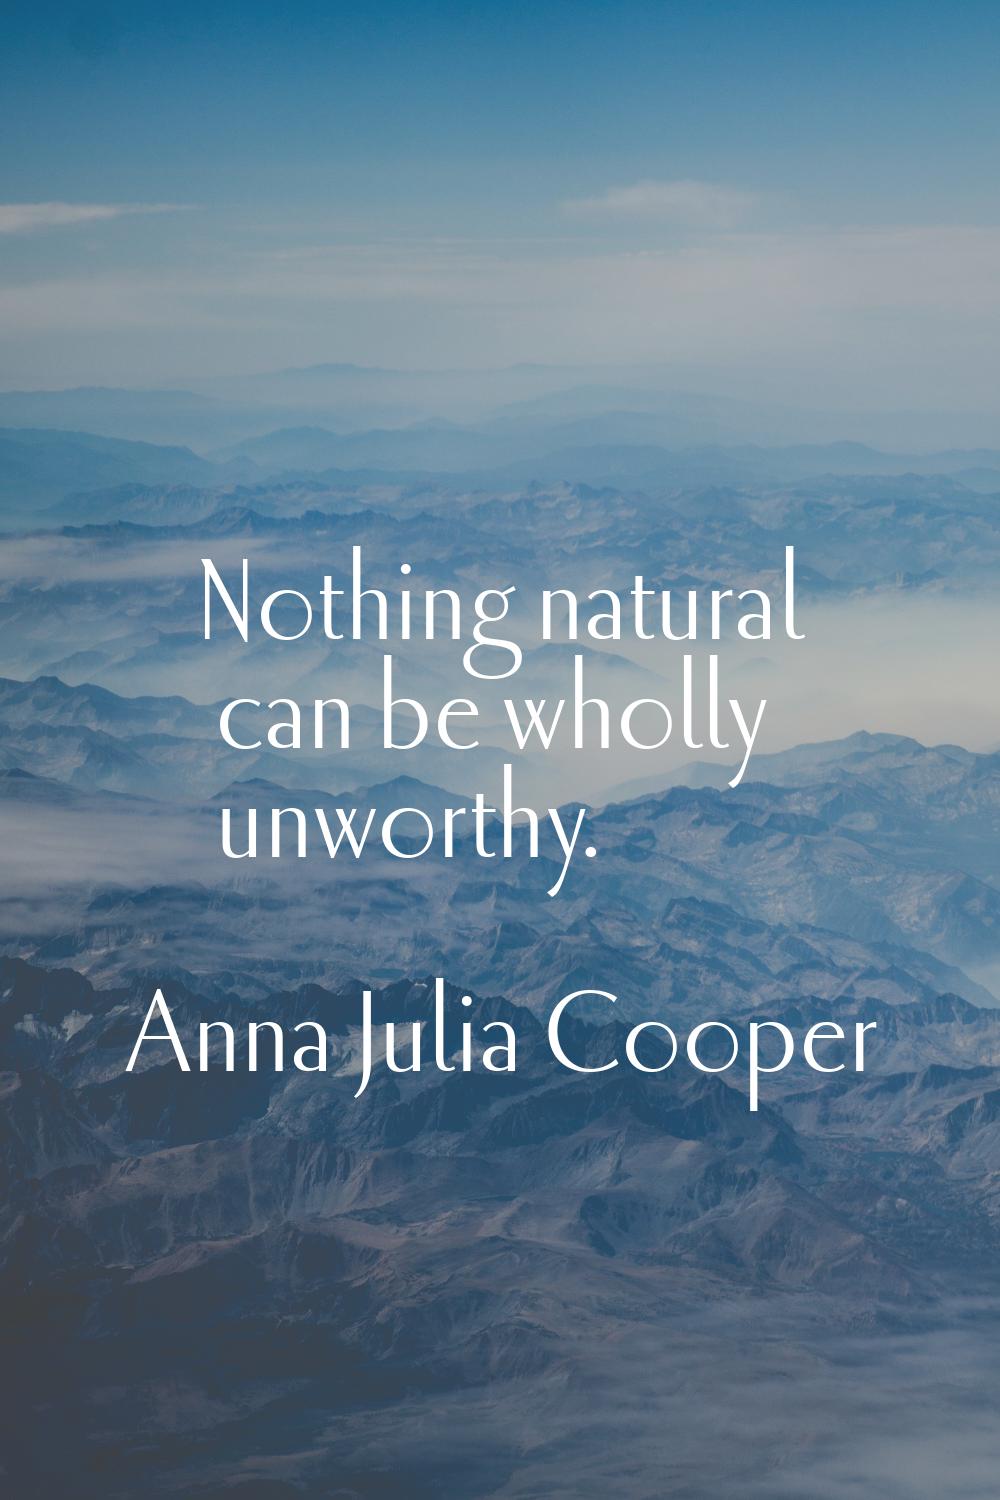 Nothing natural can be wholly unworthy.